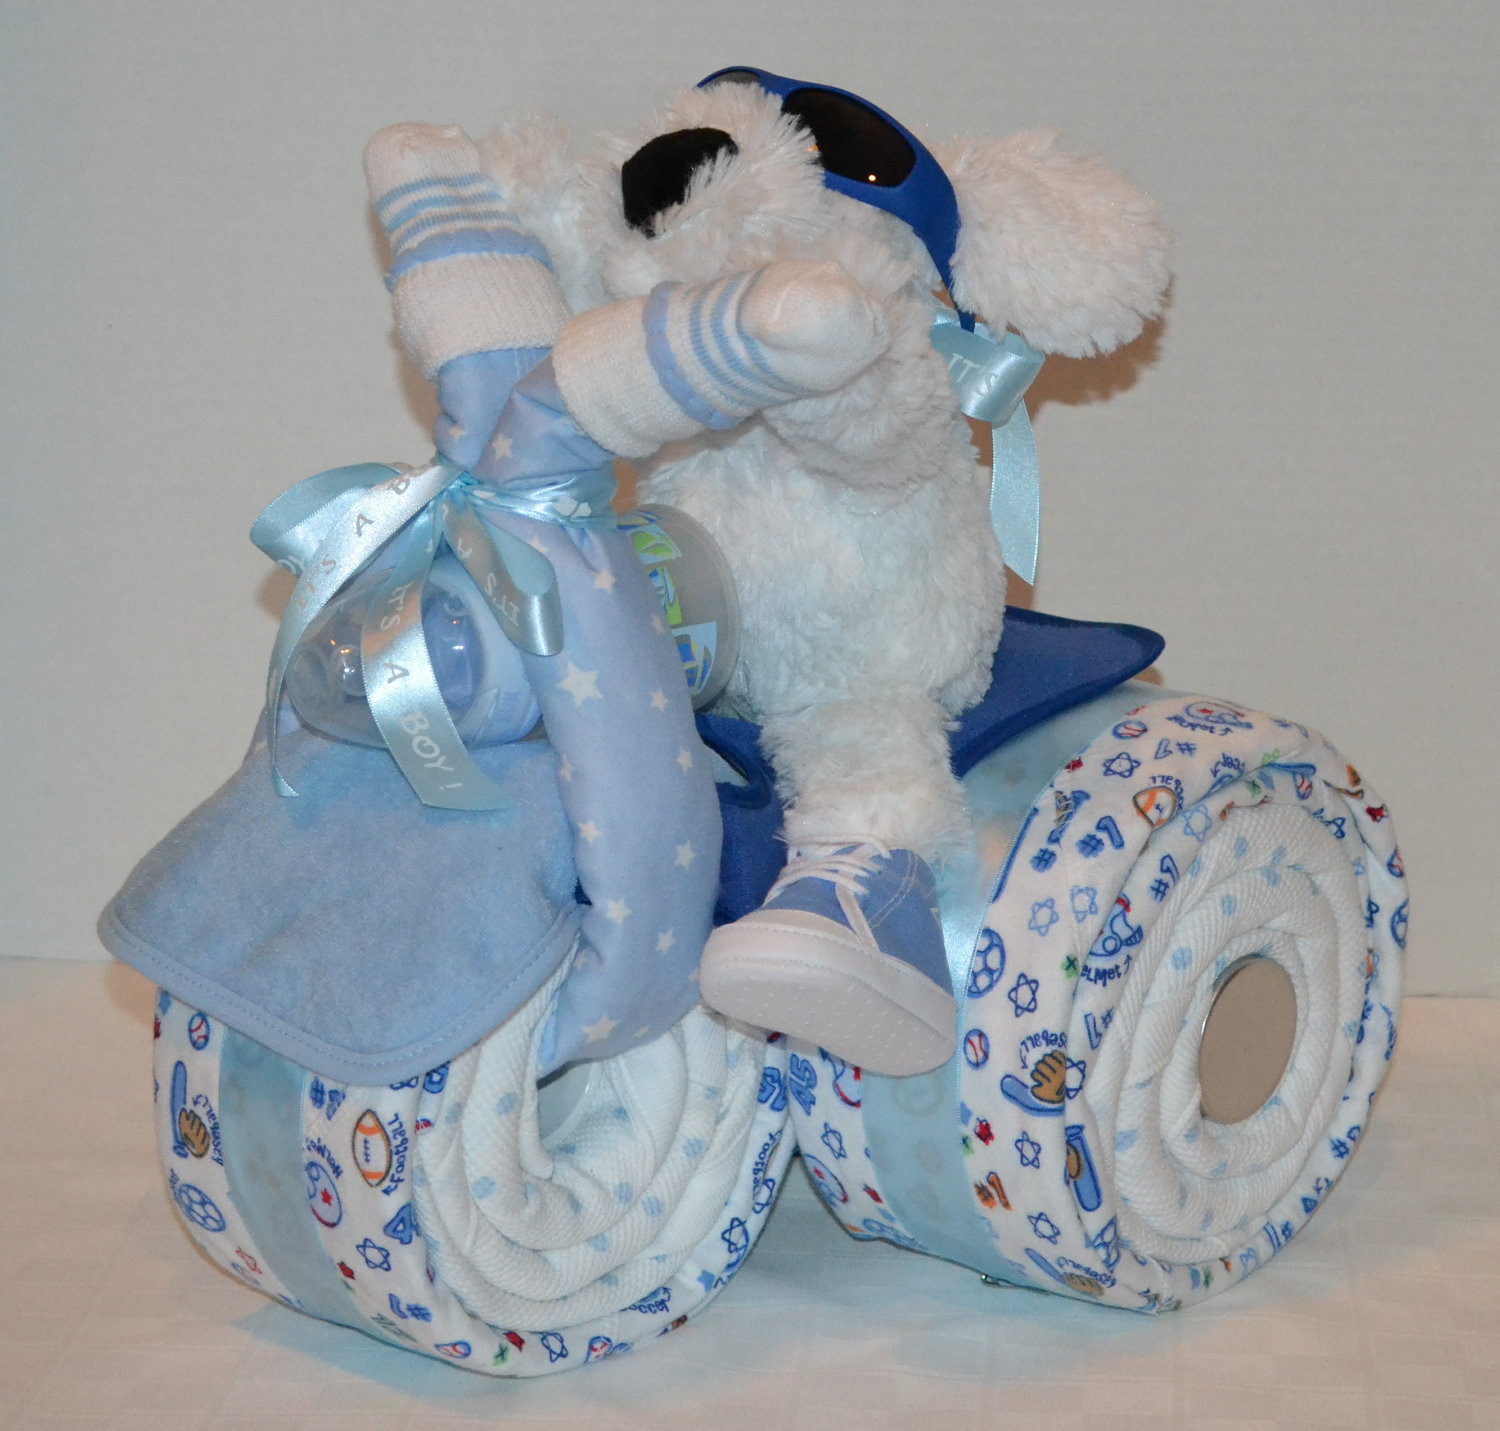 Baby Gift Ideas For Boys
 Tricycle Trike Diaper Cake Baby Shower Gift Sports theme